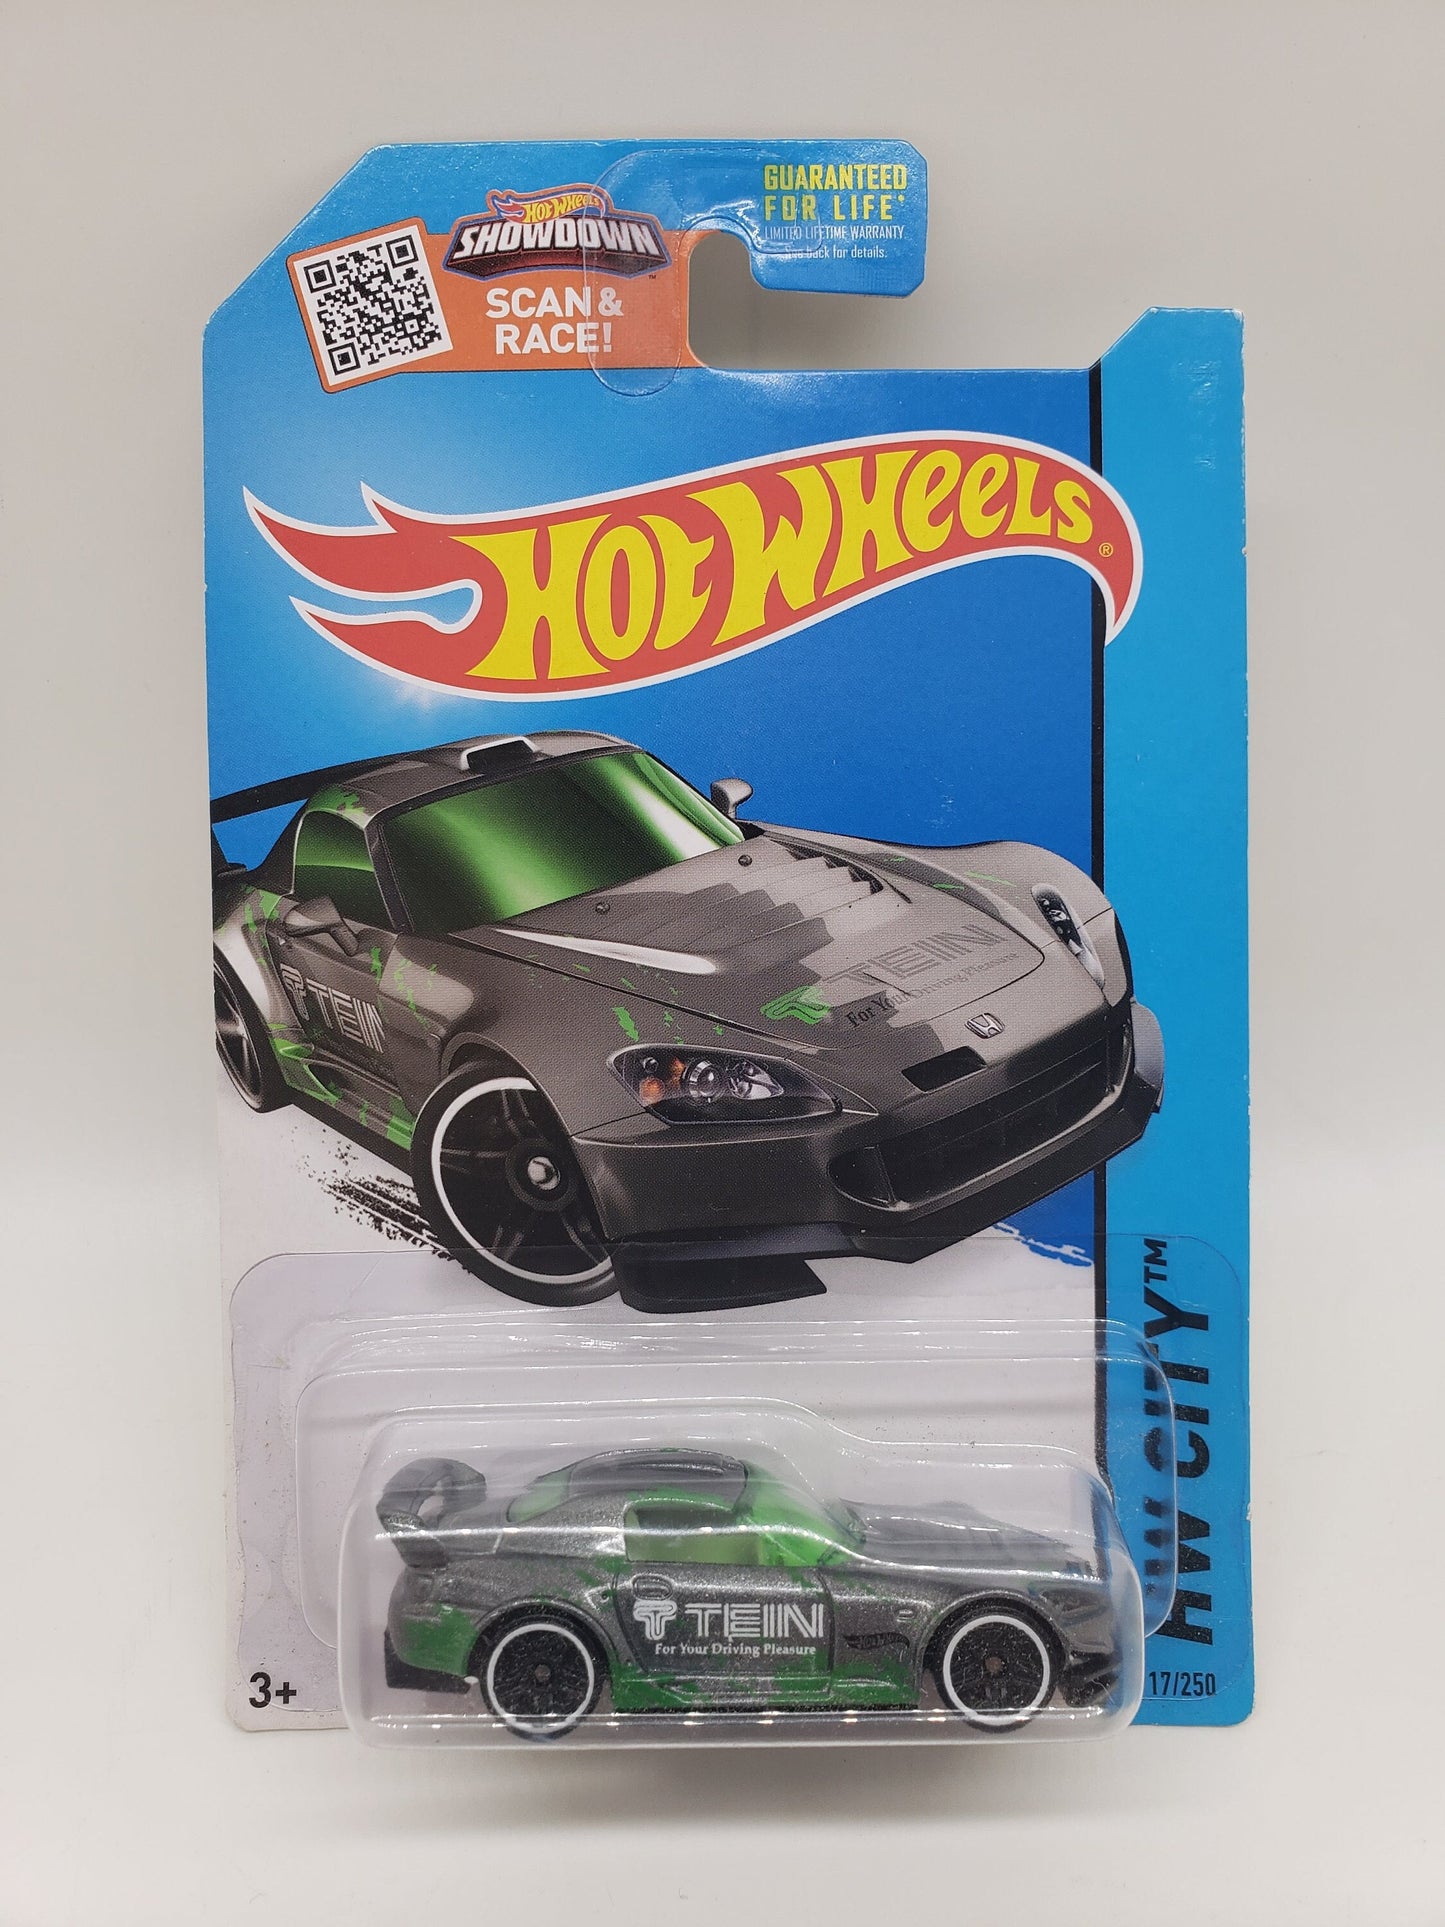 Hot Wheels Honda S2000 Gray HW City Miniature Collectable Scale Model Toy Car Perfect Birthday Gift